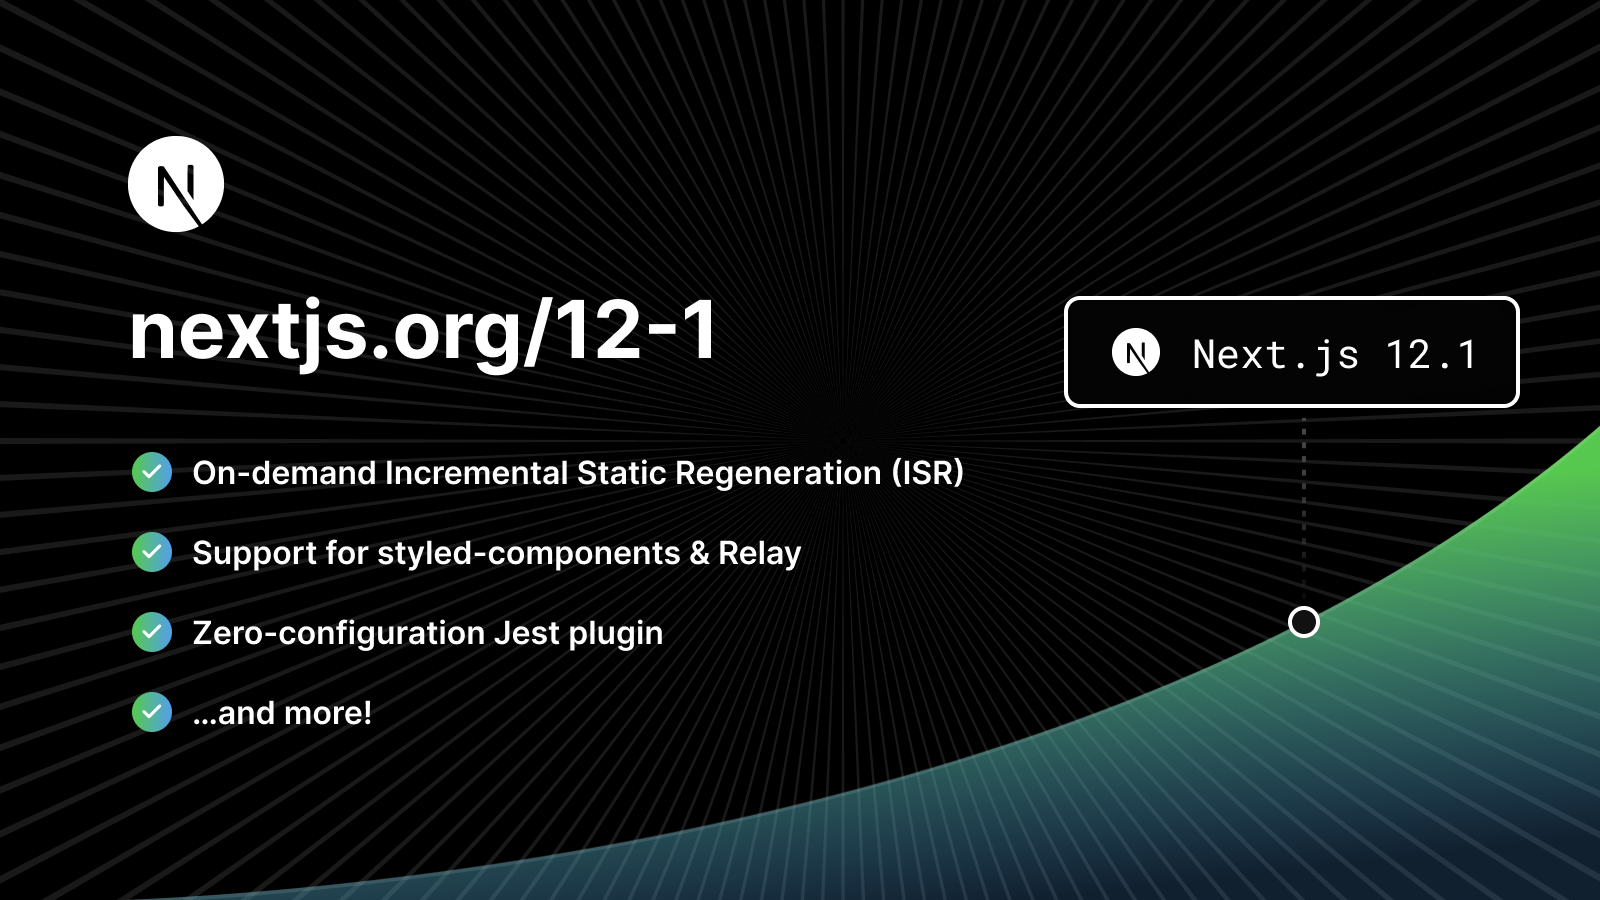 Cover for "Next.js 12.1 is now available"